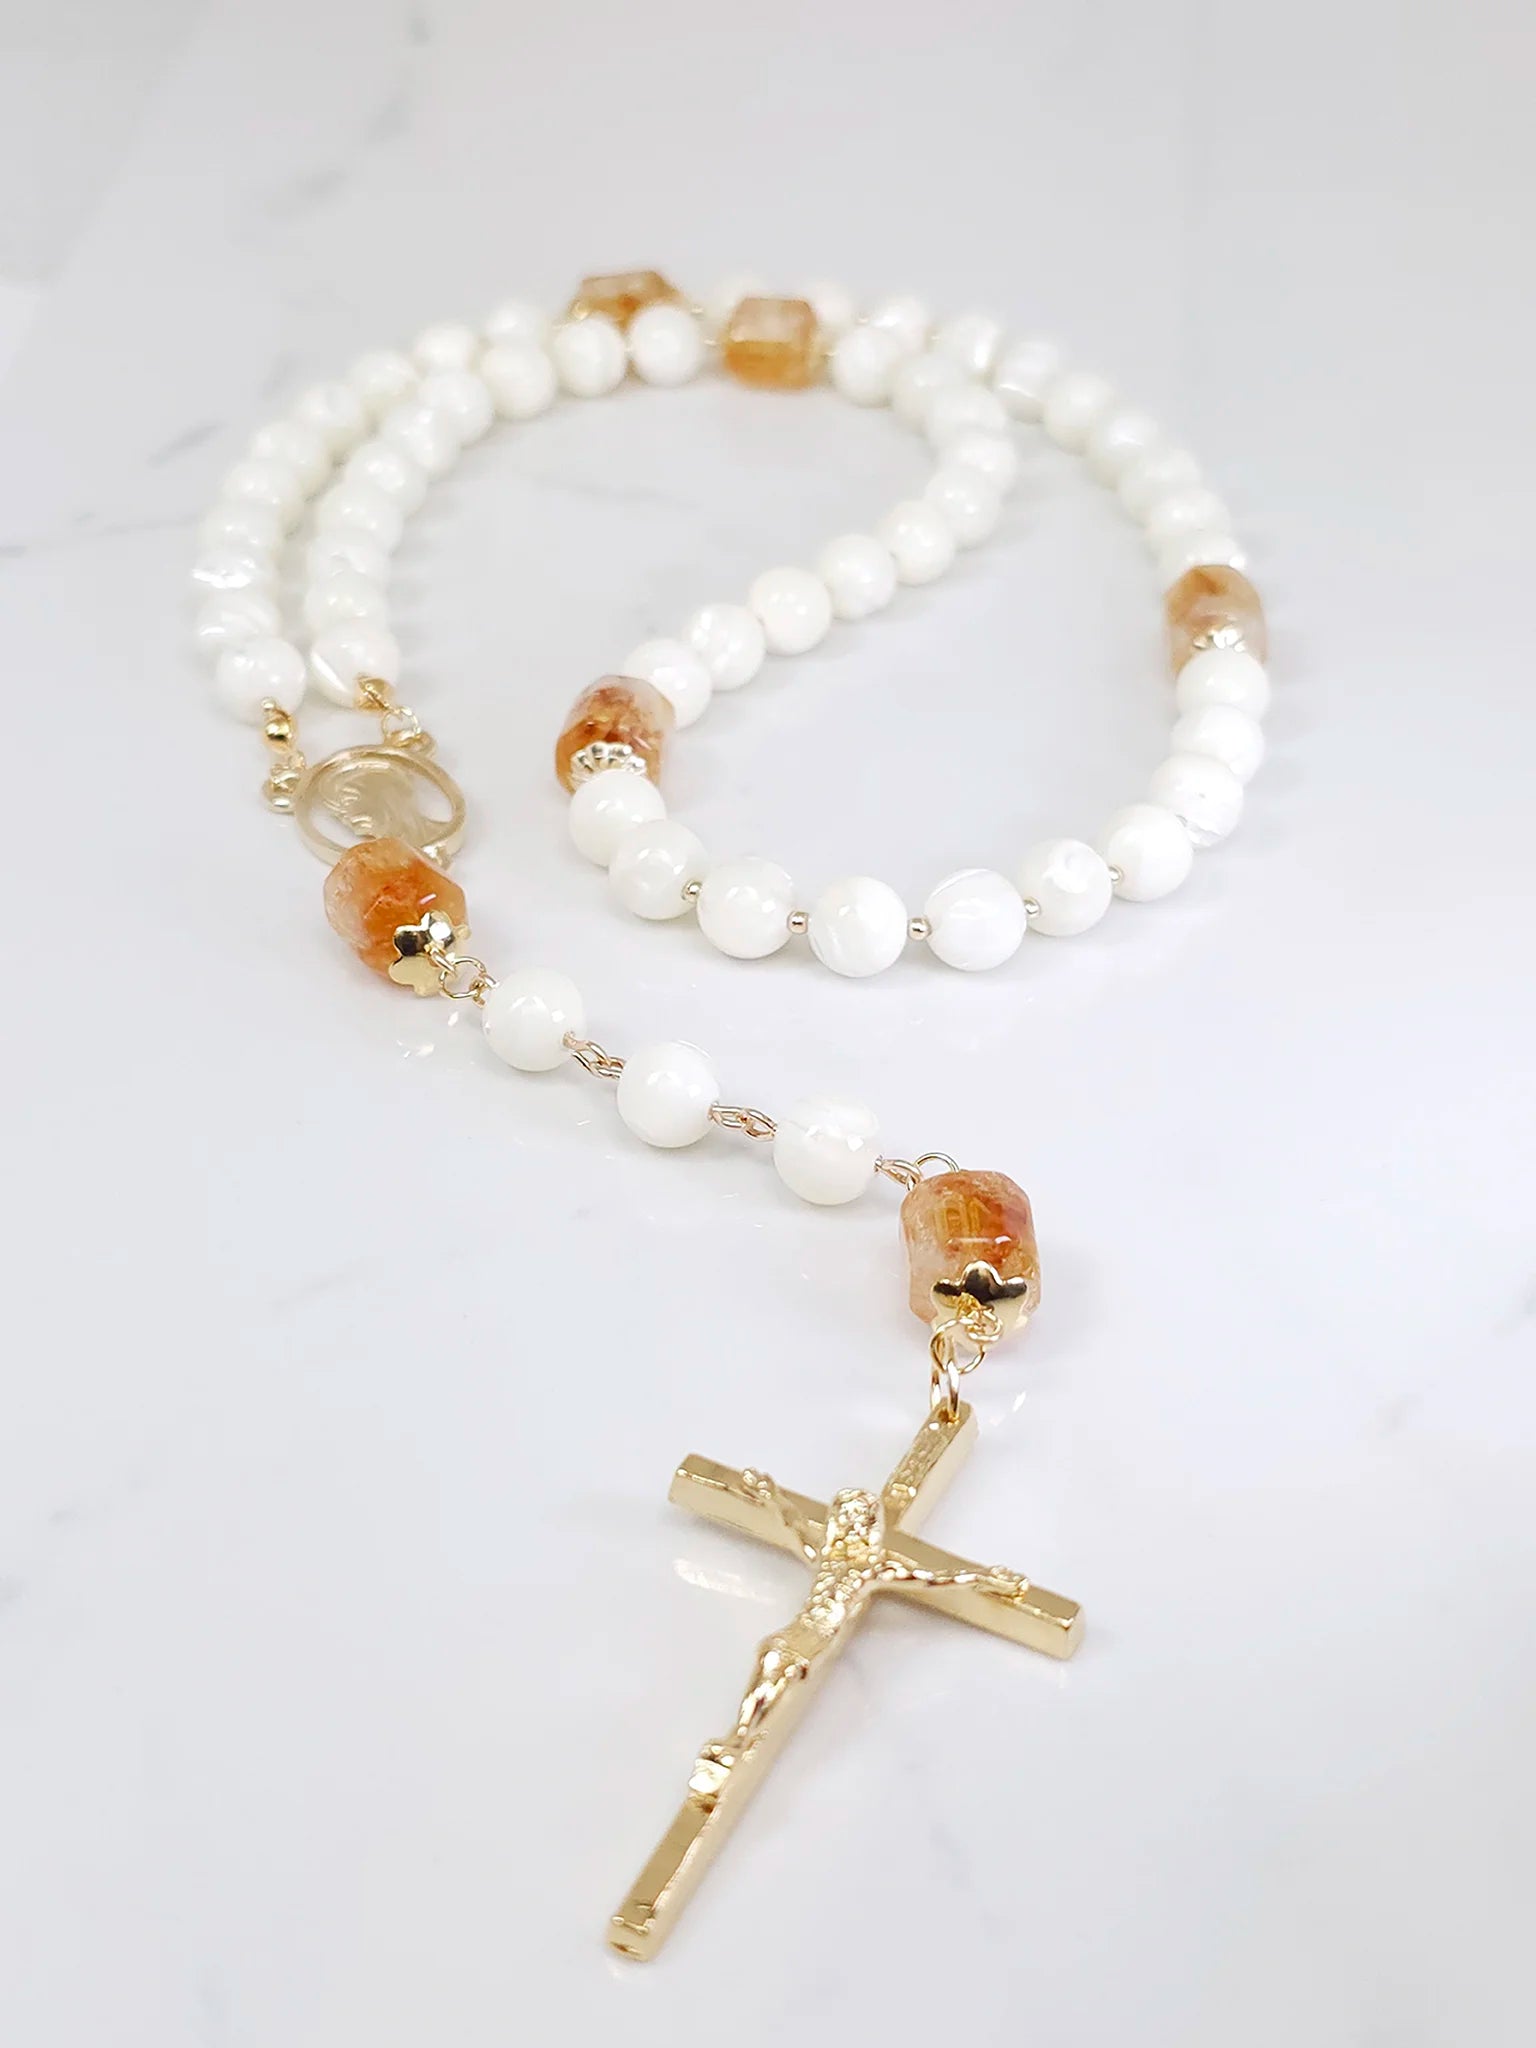 Rosary necklace combining White Mother of Pearl and sunlit Citrine, adorned with a Madonna medal, laid on a white table.